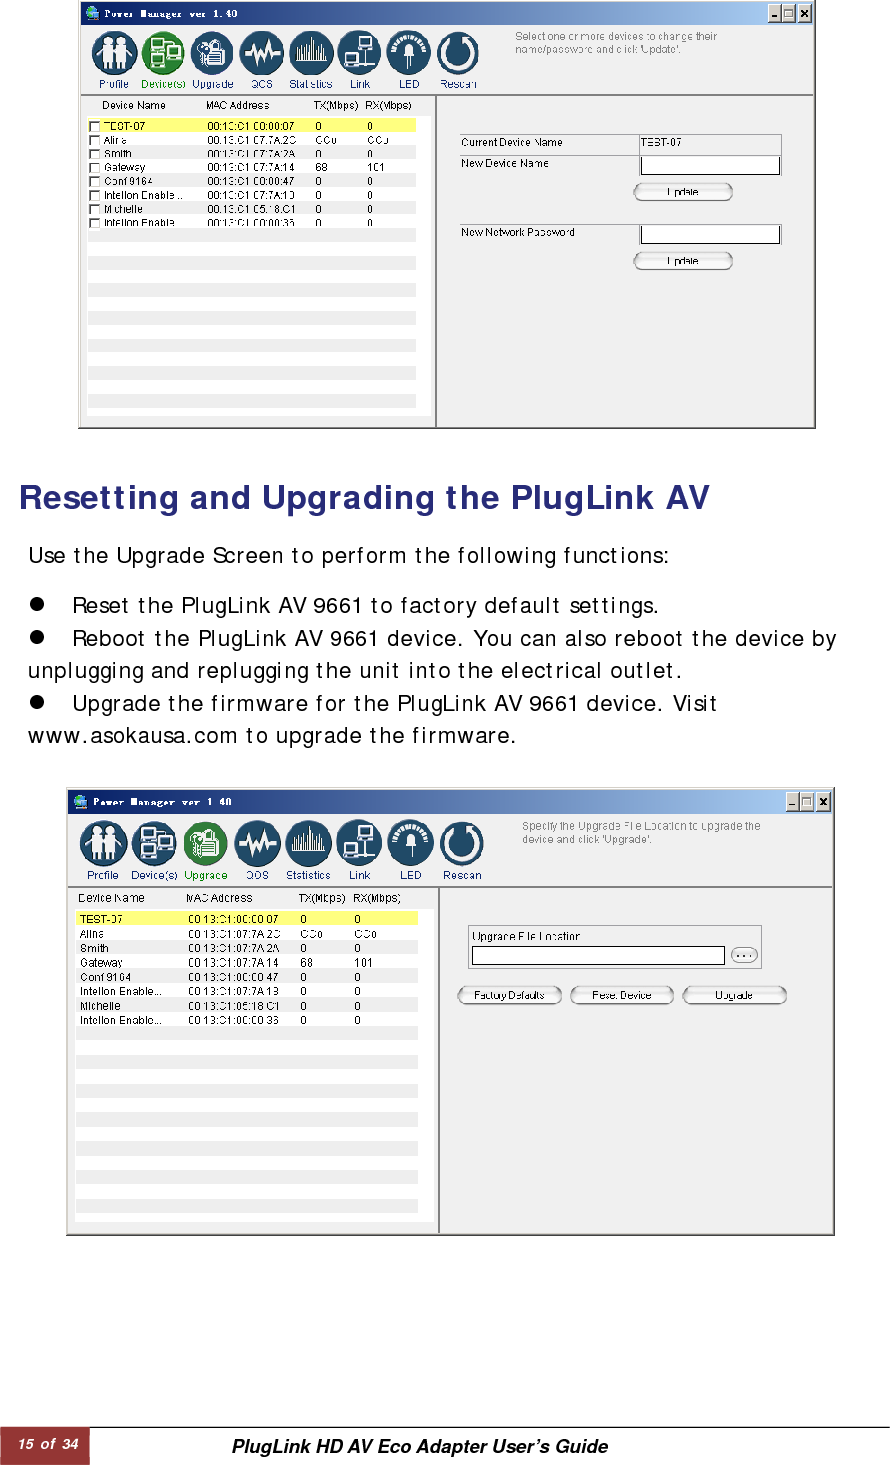 15 of 34  PlugLink HD AV Eco Adapter User’s Guide z Reset the PlugLink AV 9661 to factory default settings.  z Reboot the PlugLink AV 9661 device. You can also reboot the device by unplugging and replugging the unit into the electrical outlet.  z Upgrade the firmware for the PlugLink AV 9661 device. Visit    www.asokausa.com to upgrade the firmware.  Use the Upgrade Screen to perform the following functions:  Resetting and Upgrading the PlugLink AV   